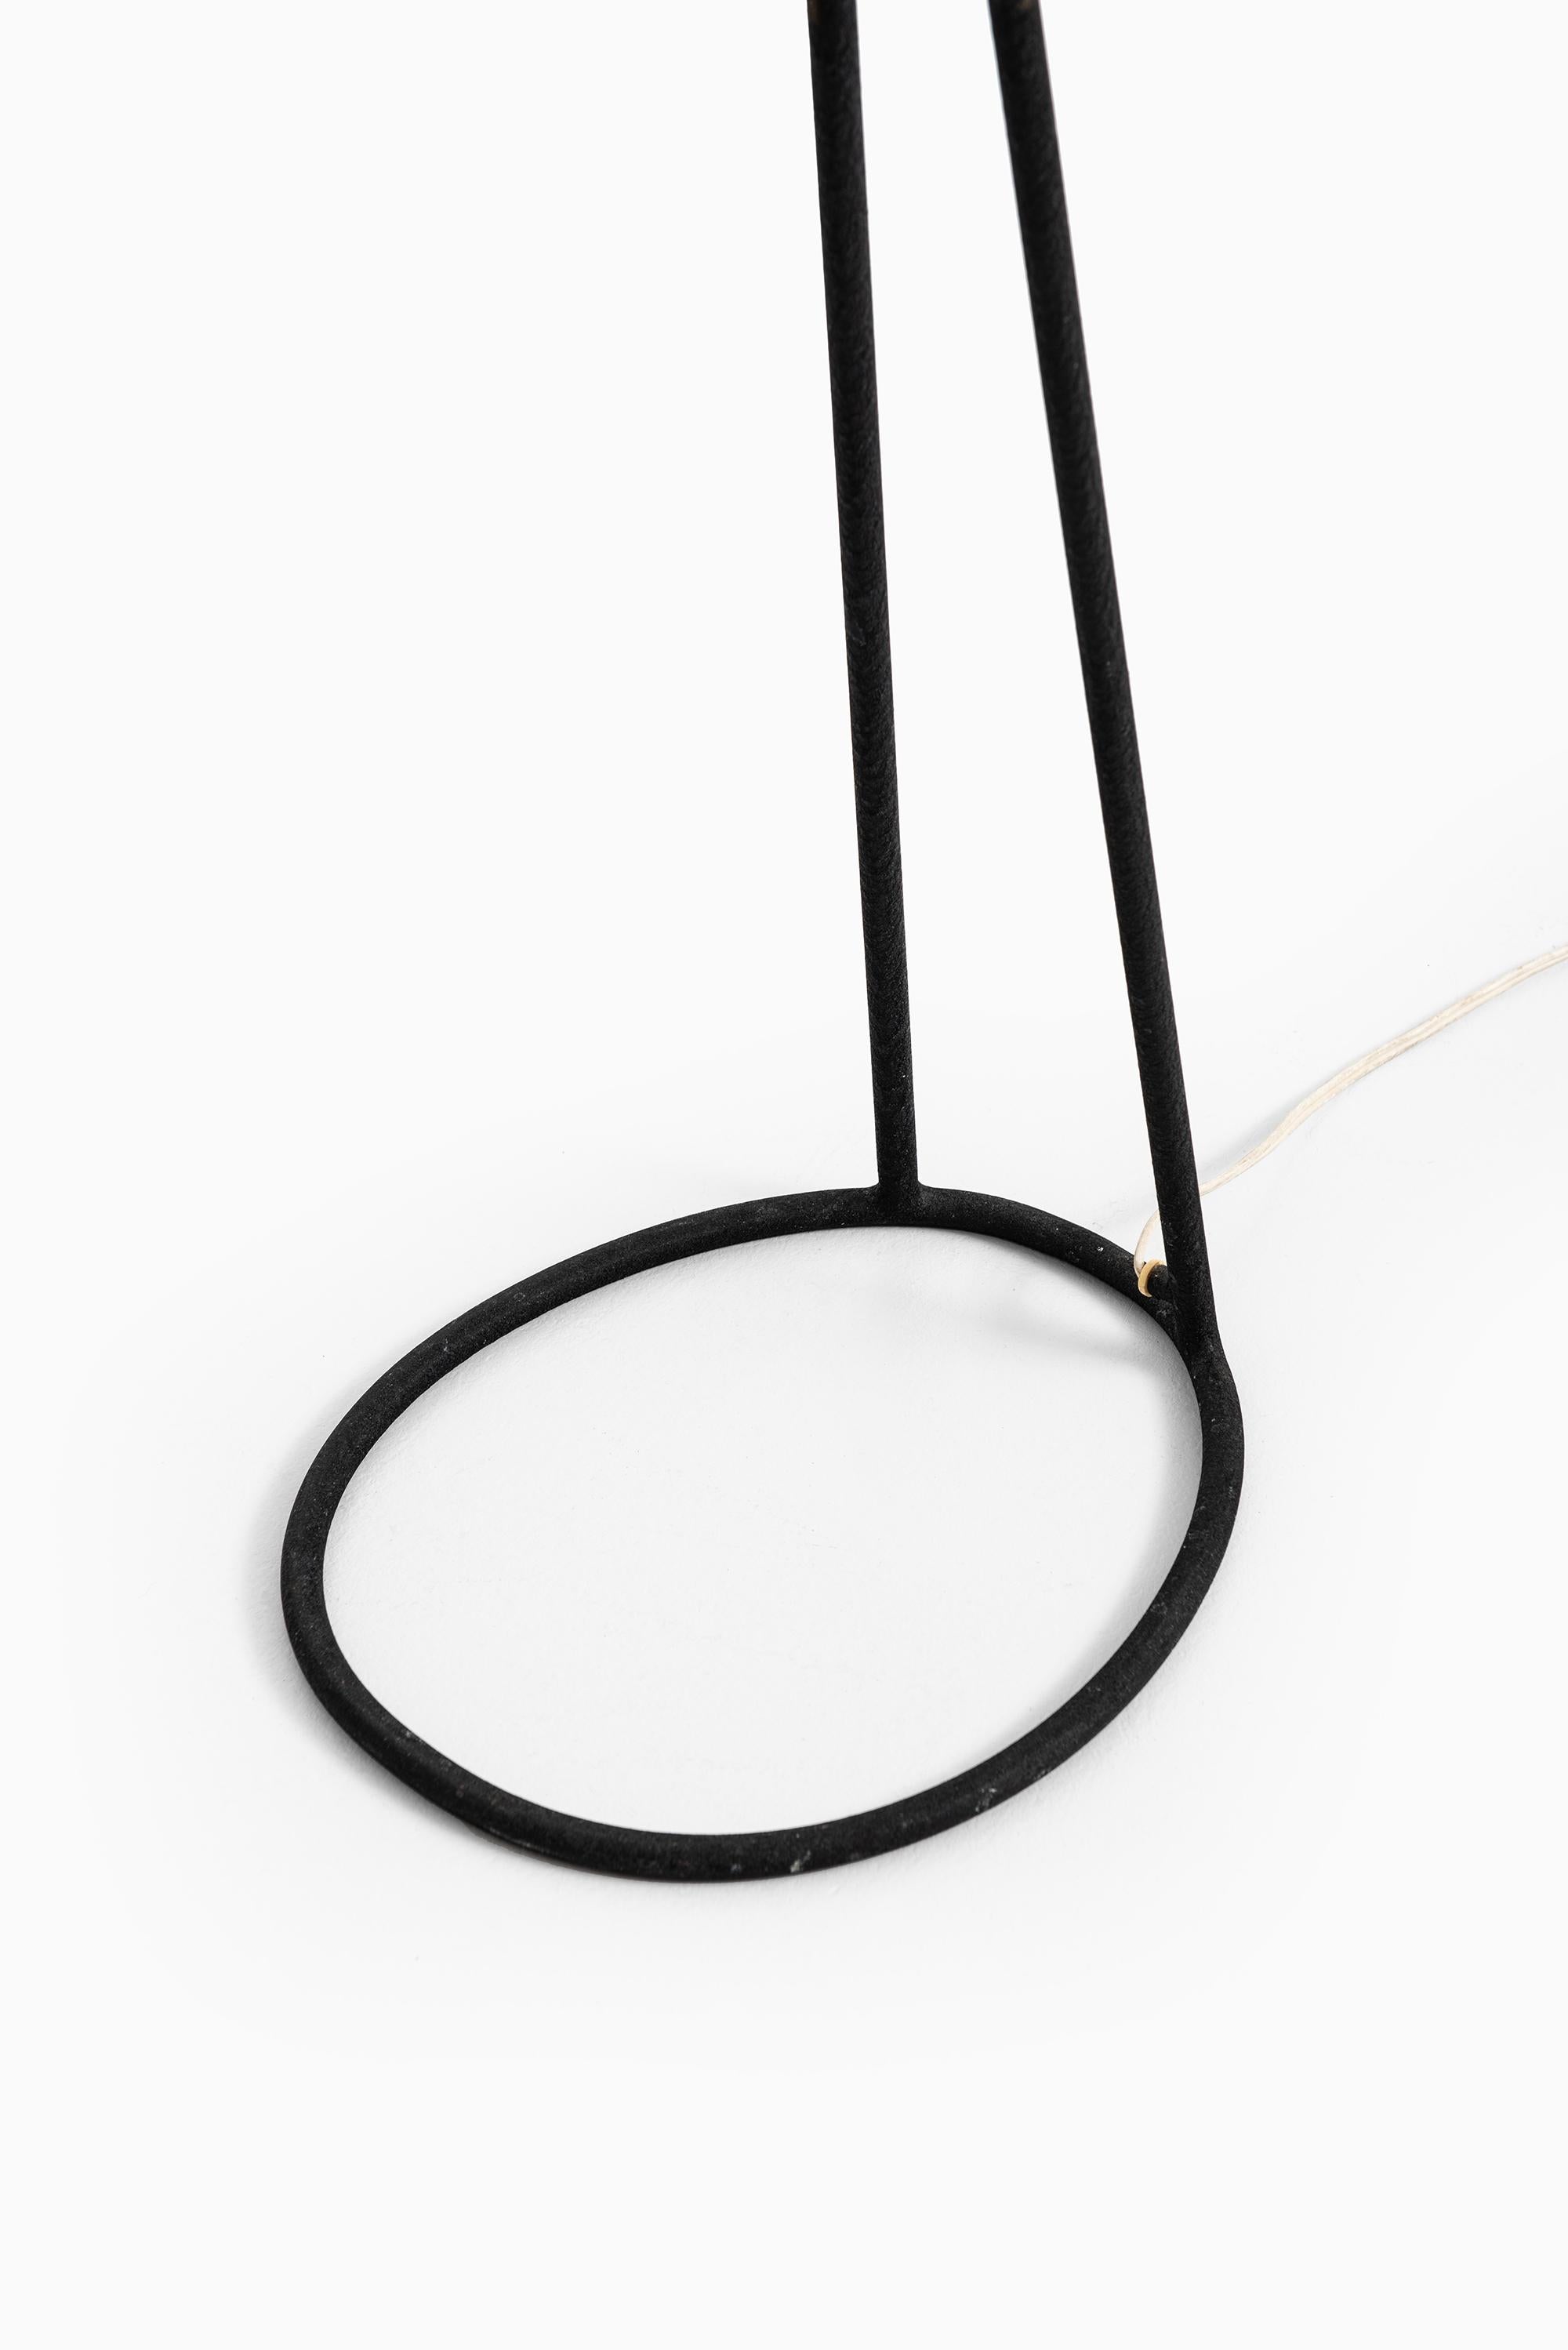 Swedish Floor Lamp with Adjustable Shade Produced by Falkenbergs Belysning in Sweden